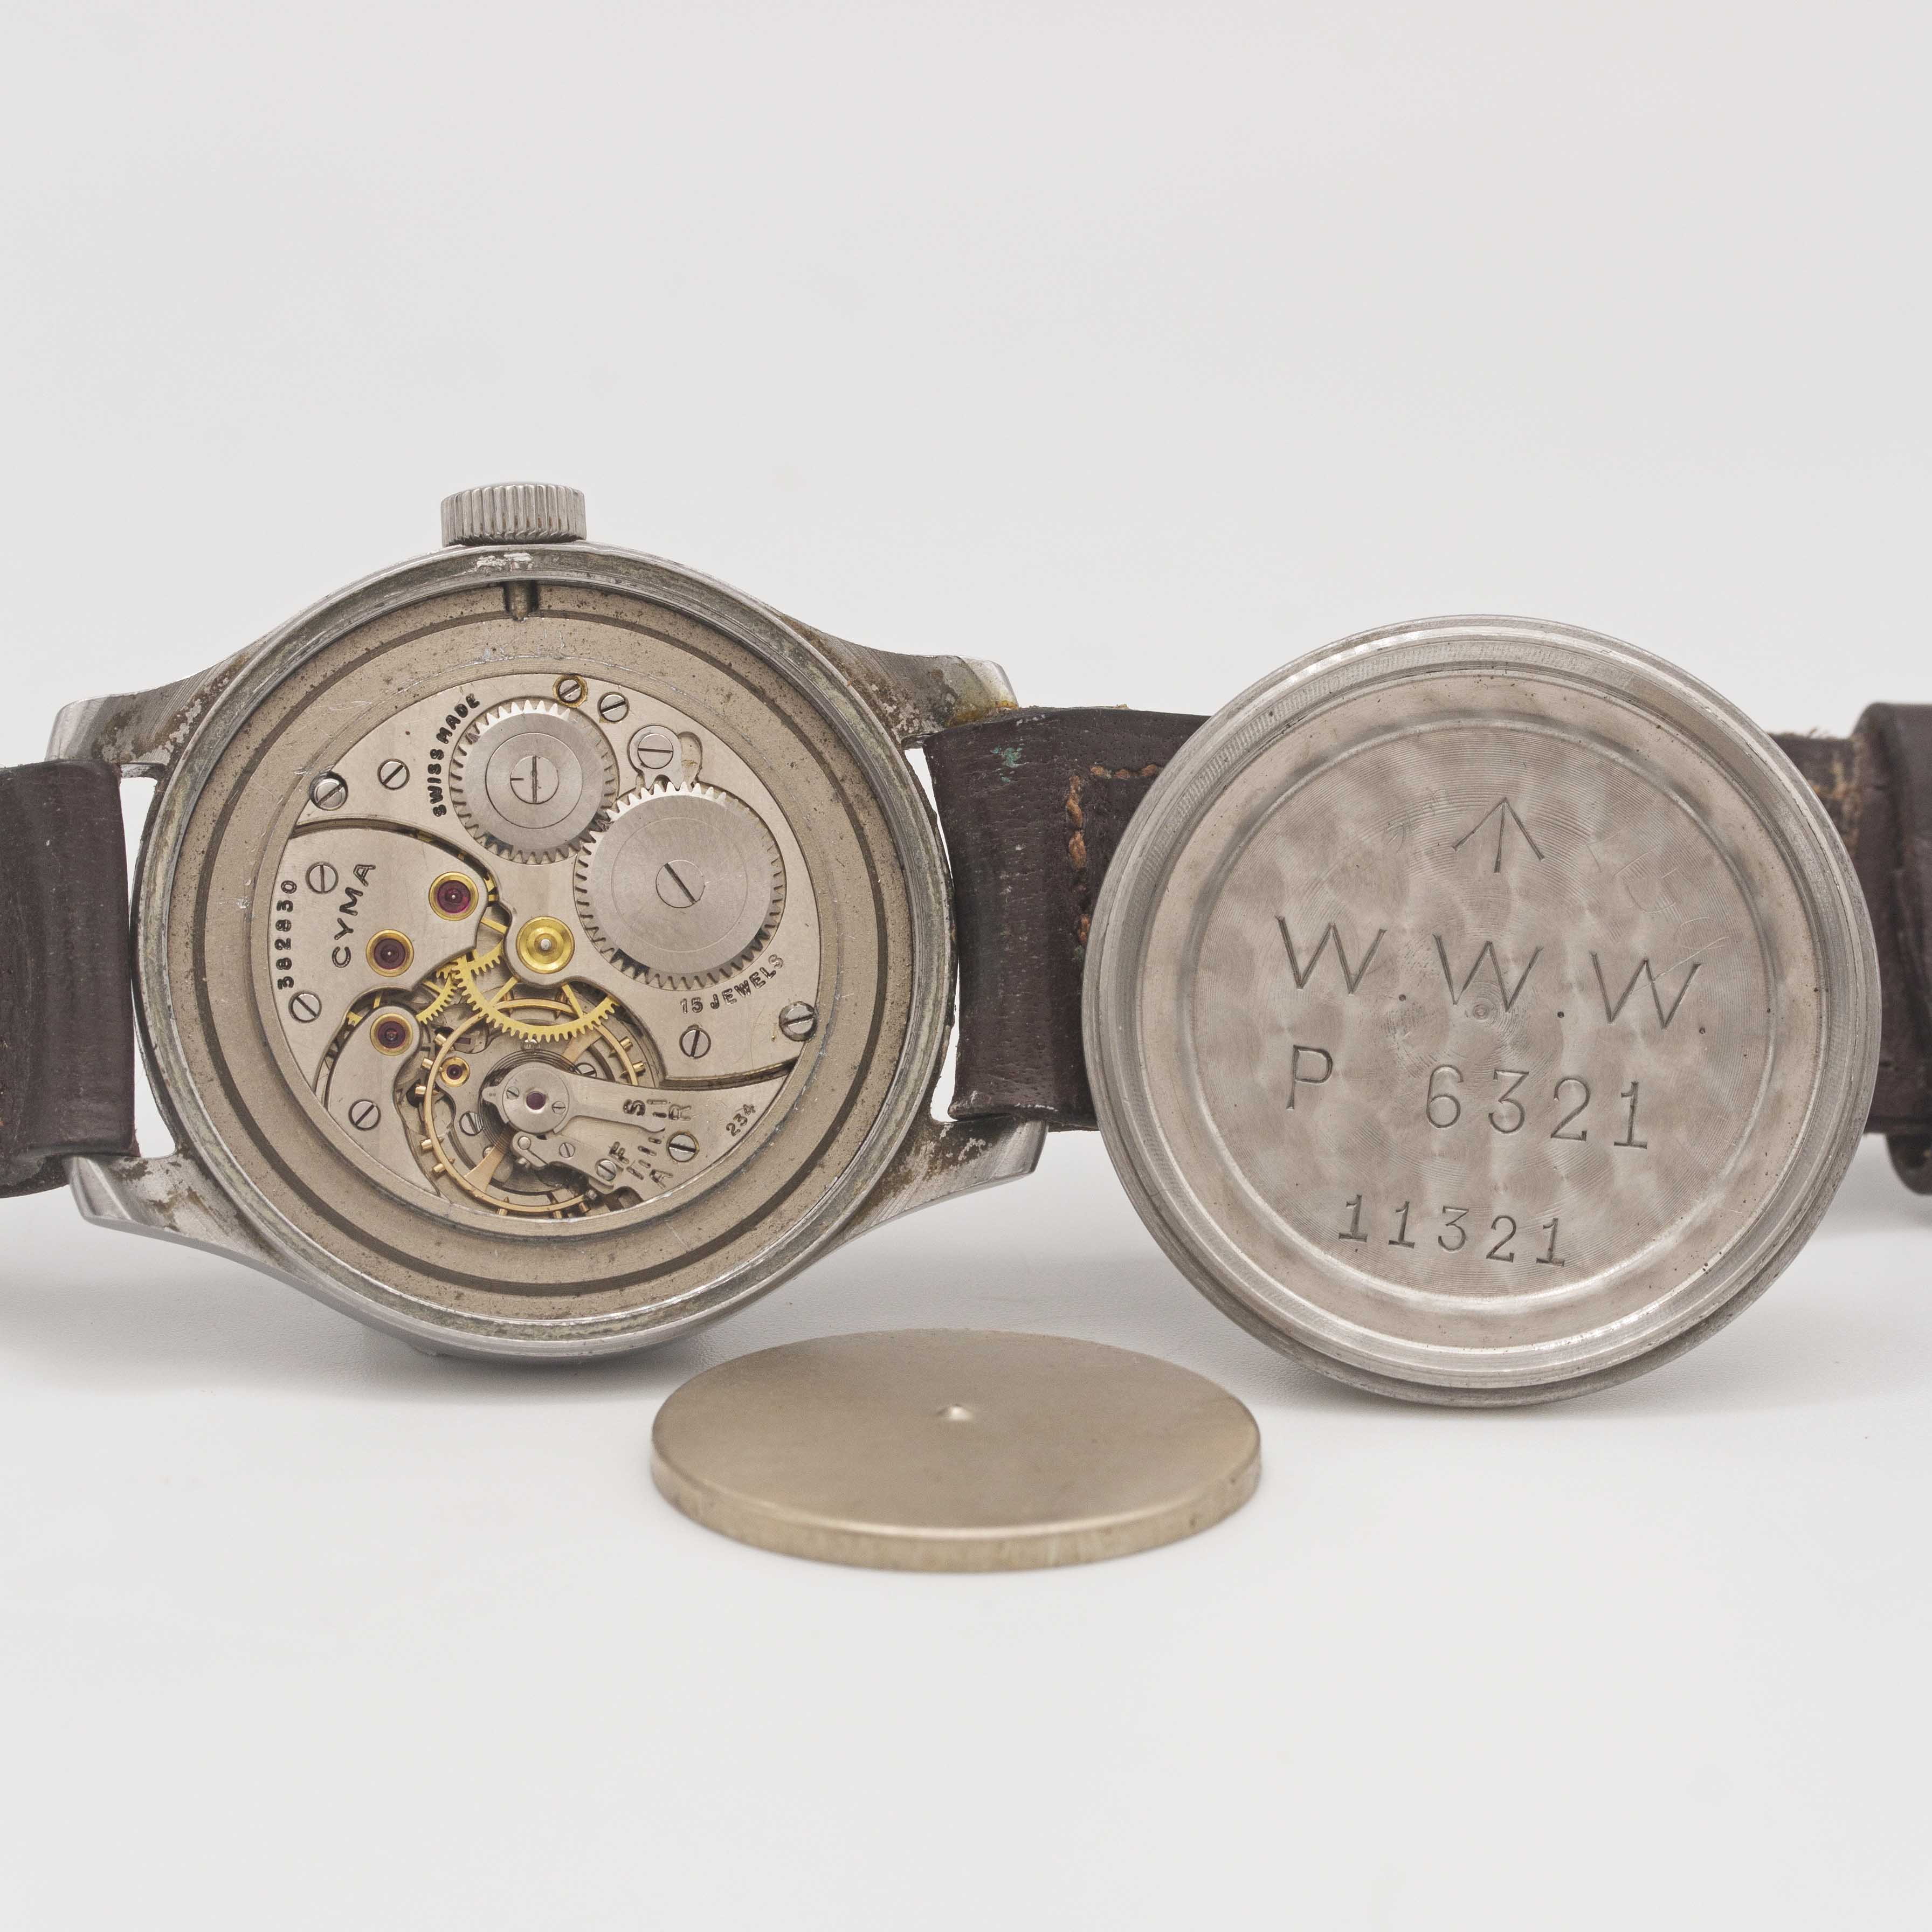 A GENTLEMAN'S STAINLESS STEEL BRITISH MILITARY CYMA W.W.W. WRIST WATCH CIRCA 1945, PART OF THE " - Image 7 of 9